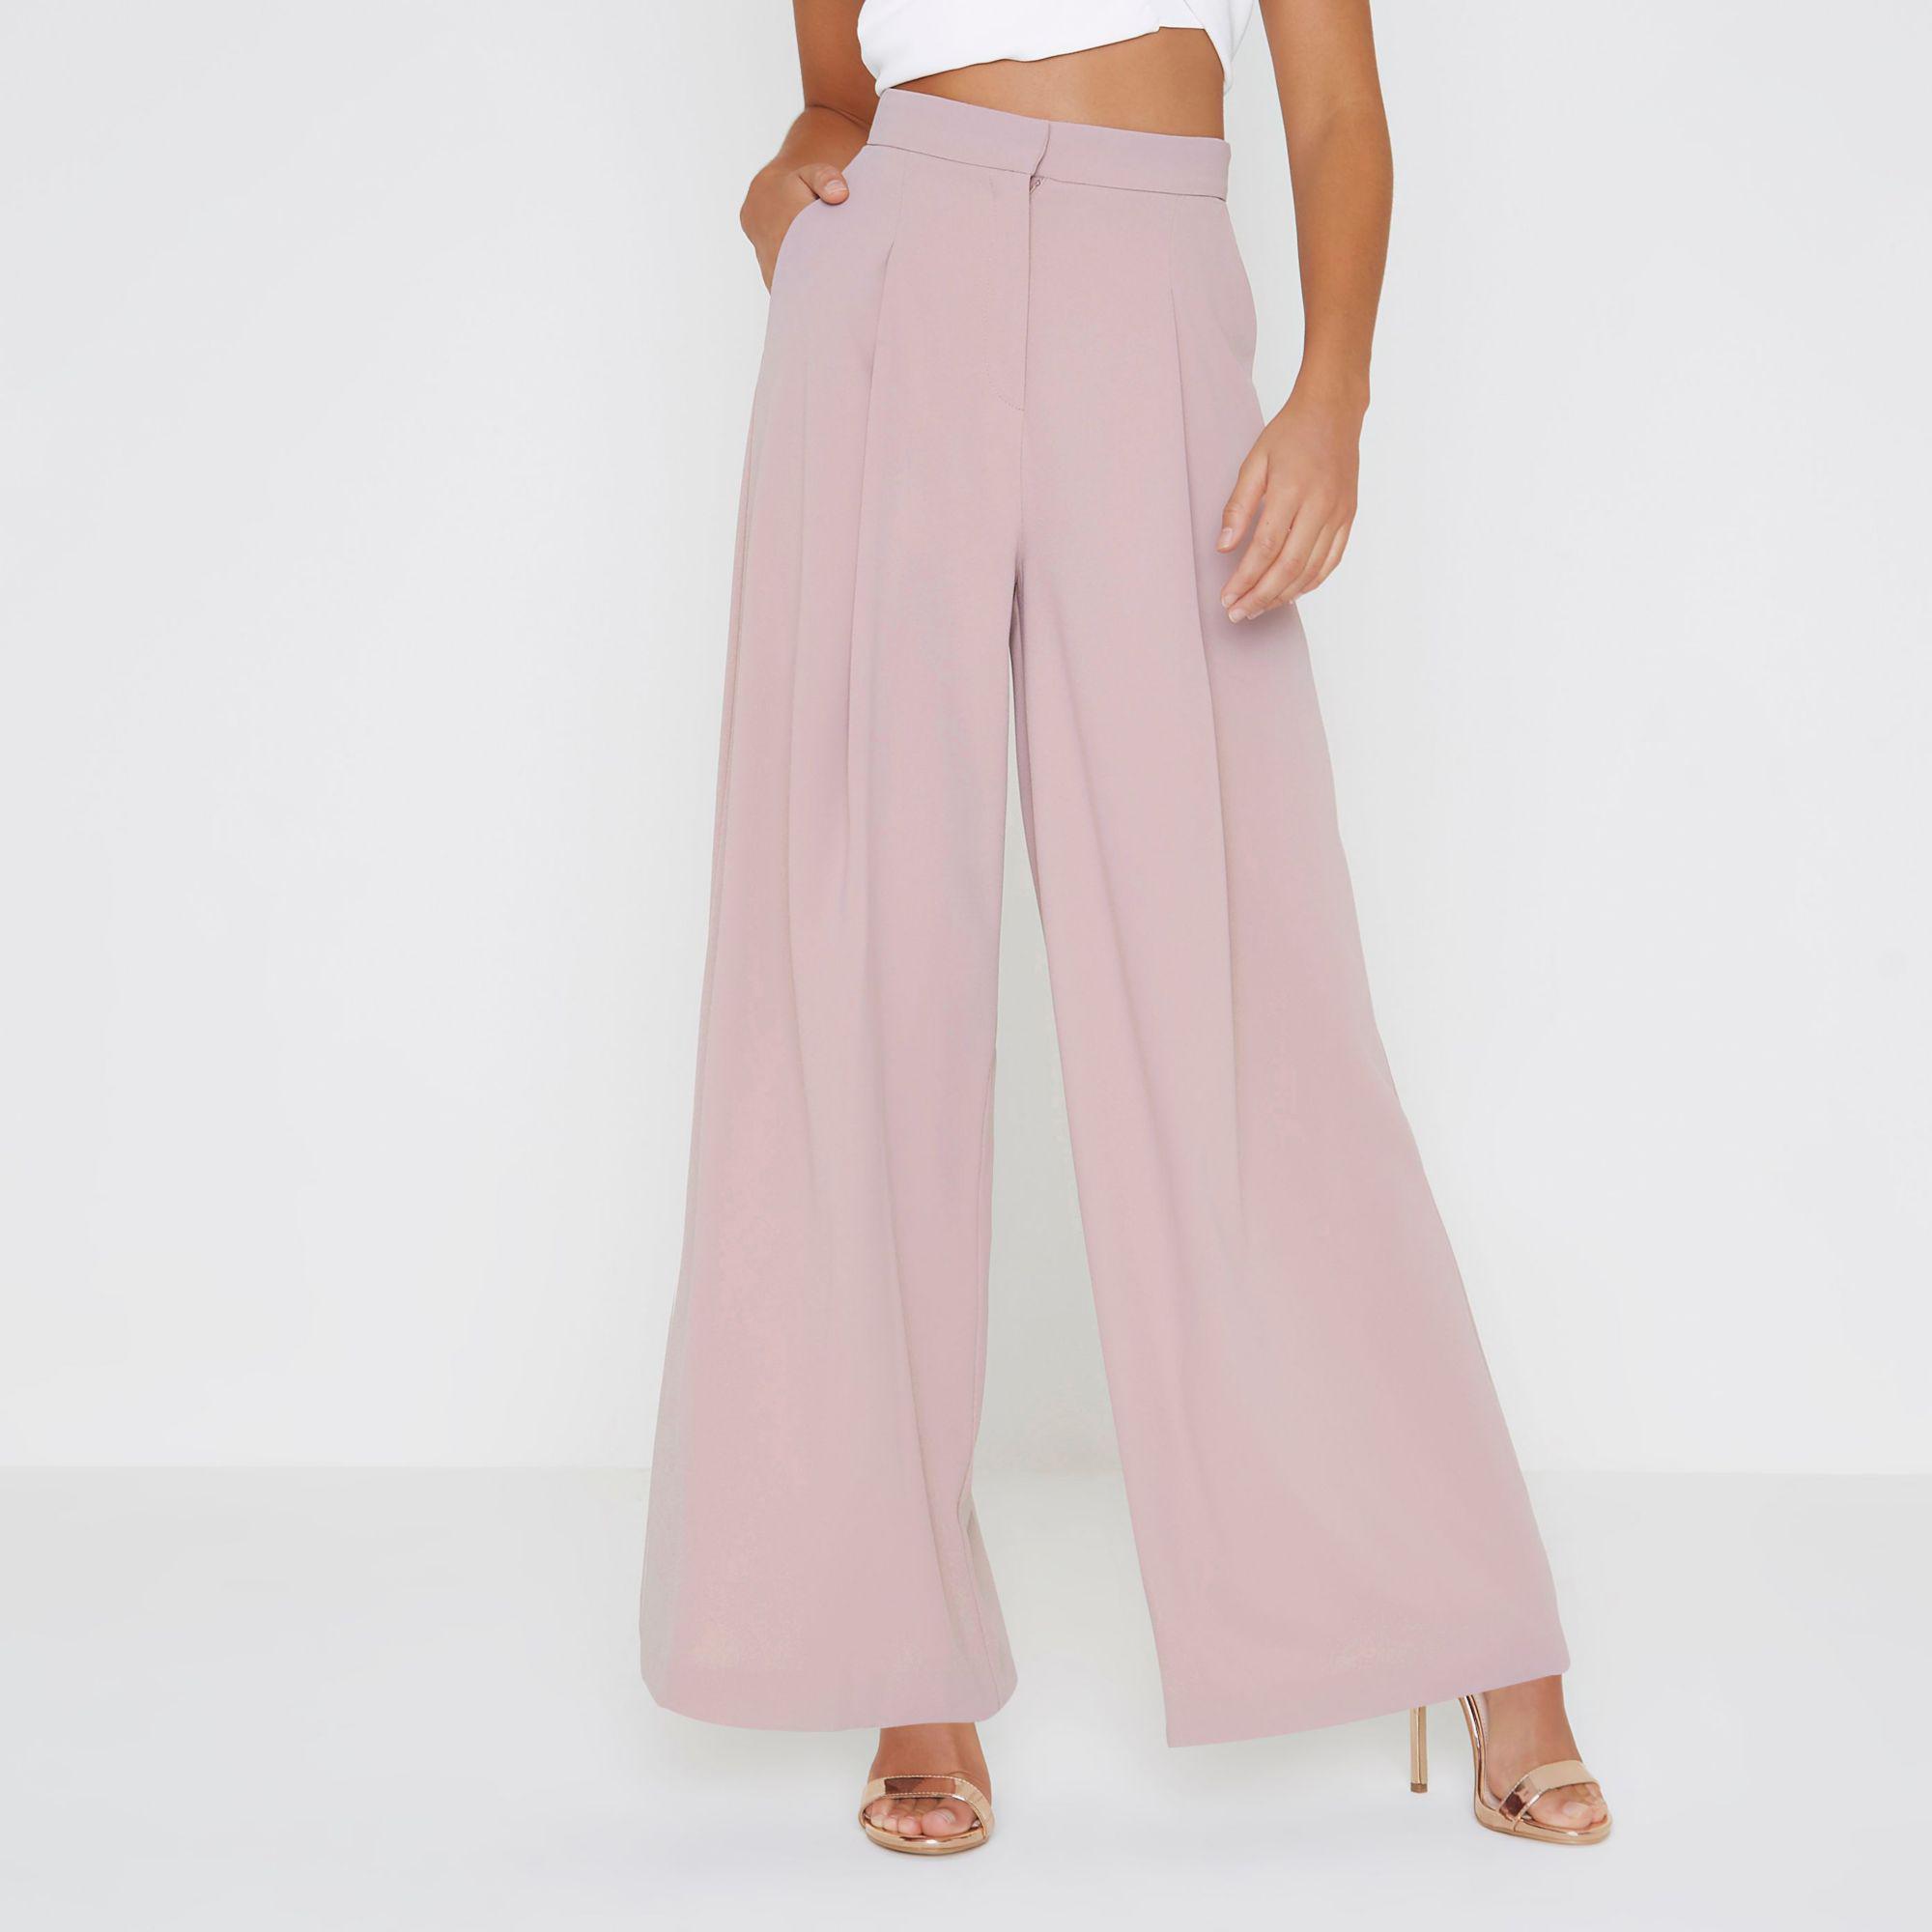 River Island Womens Pink Faux Leather Straight Leg Trousers  Compare   Union Square Aberdeen Shopping Centre